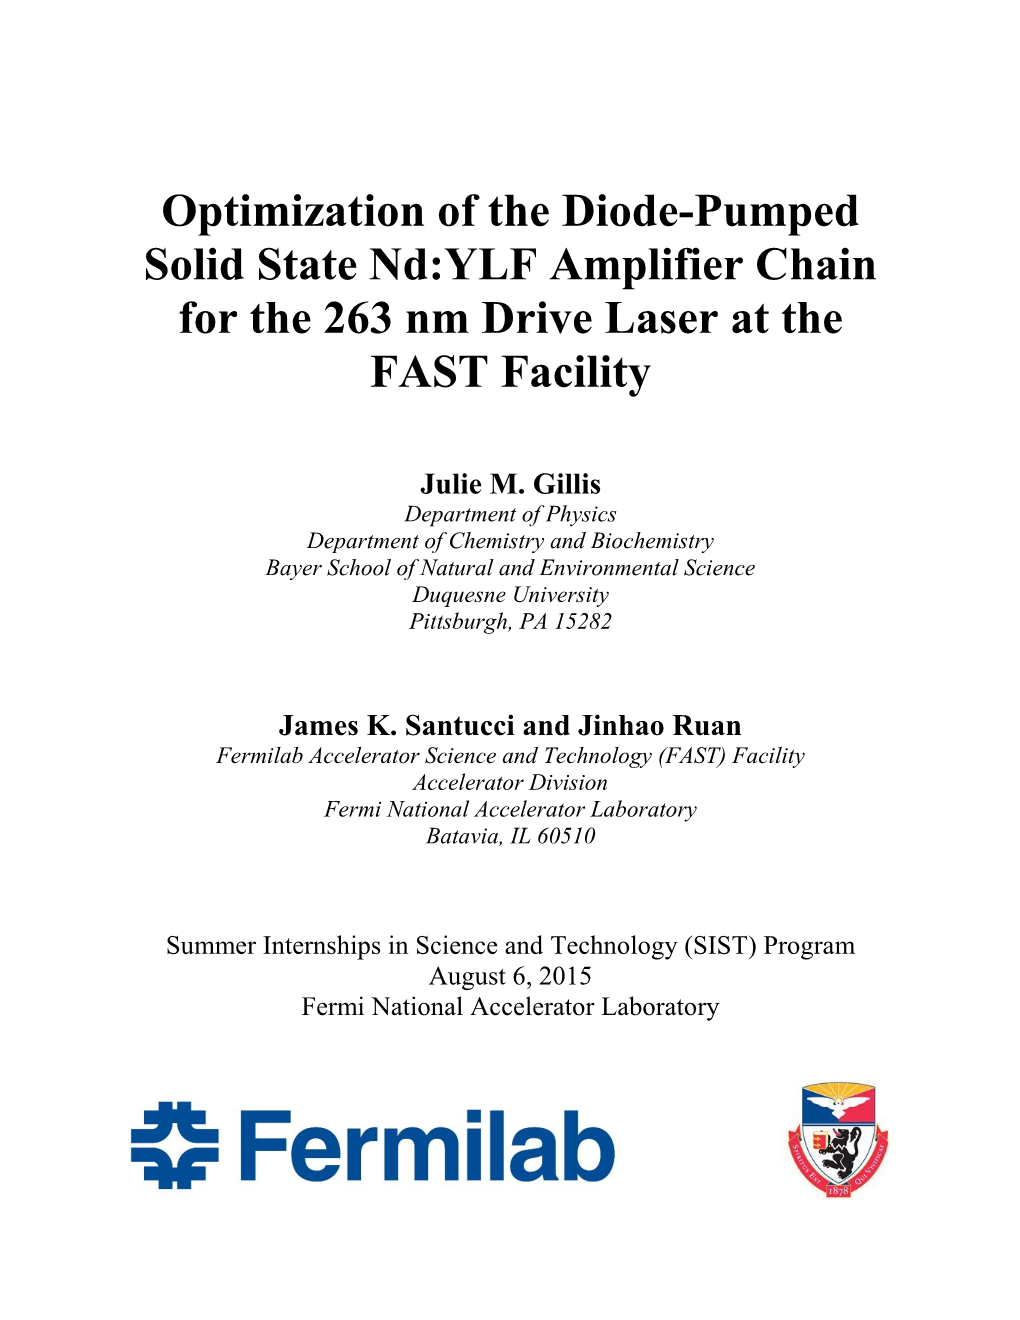 Optimization of the Diode-Pumped Solid State Nd:YLF Amplifier Chain for the 263 Nm Drive Laser at the FAST Facility